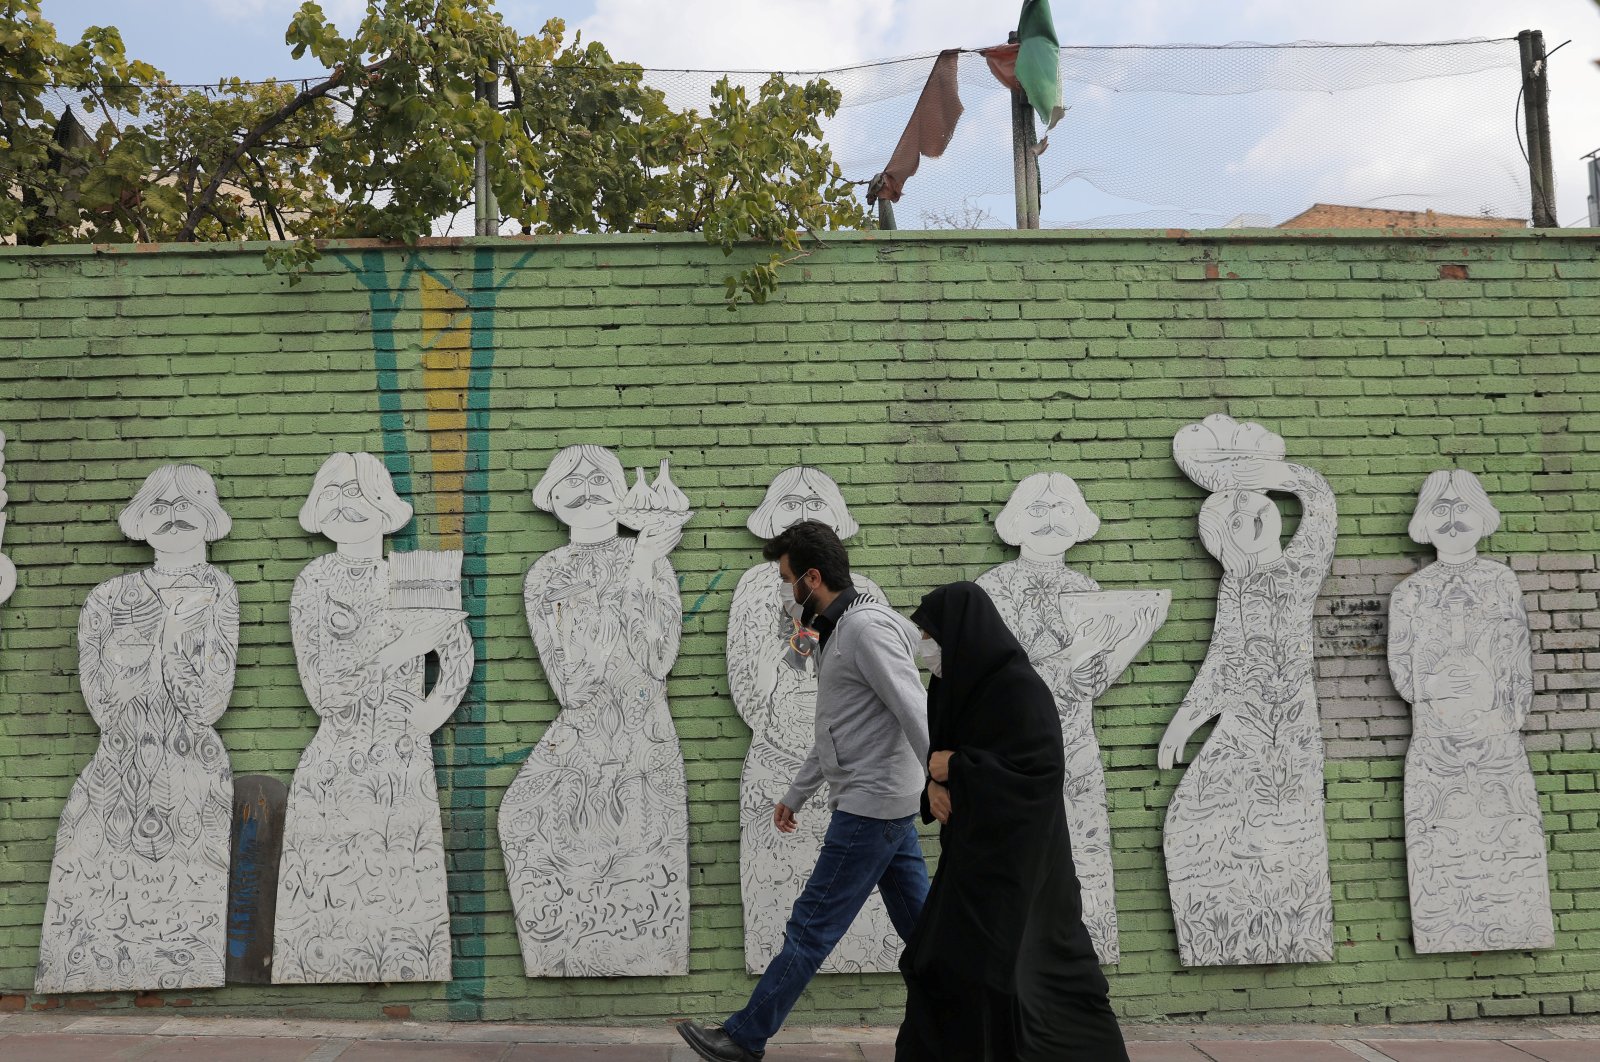 Iranians wearing face masks walk on a street after government authorities made it mandatory for all to wear face masks in public following the outbreak of the coronavirus disease (COVID19), in Tehran, Iran, Oct. 10, 2020. (Photo by West Asia News Agency via Reuters )